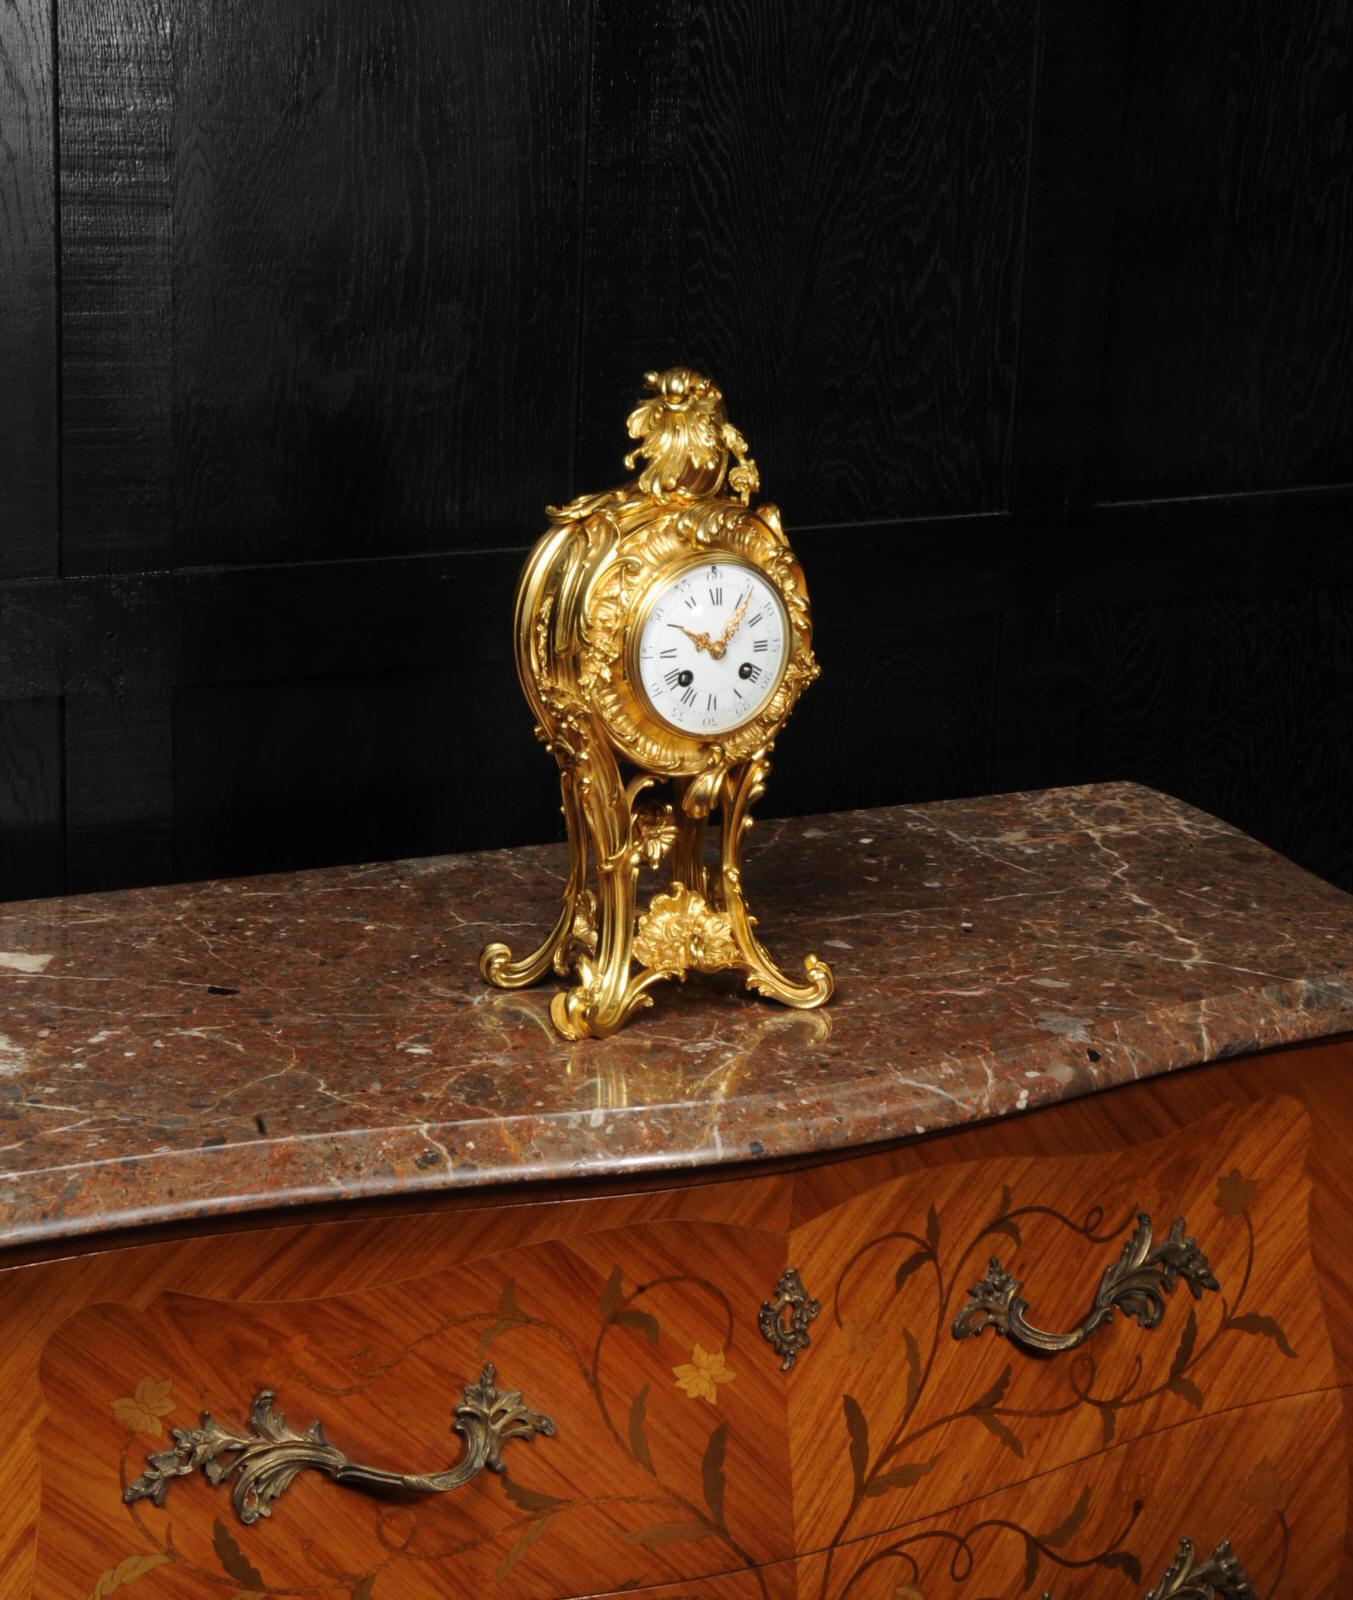 Superb Antique French Rococo Ormolu Clock with Visible Pendulum by Emile Colin 1